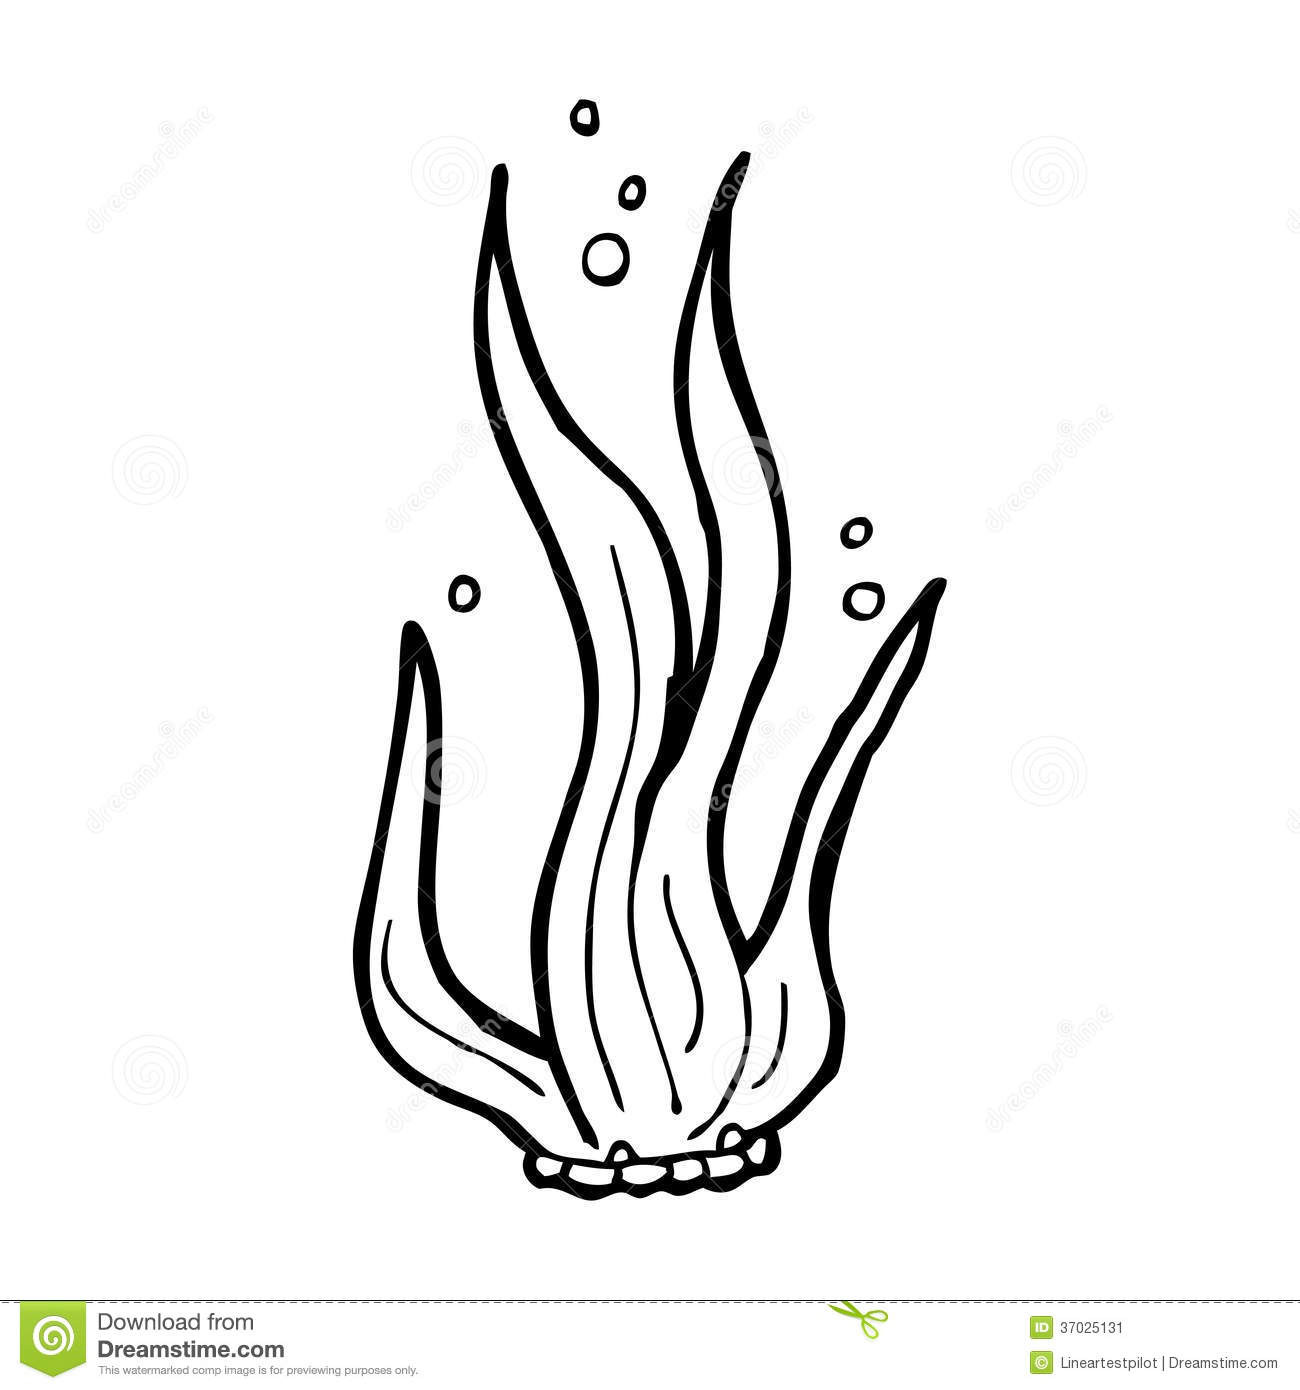 coloring pages of seaweed seaweed coloring pages to download and print for free pages seaweed coloring of 